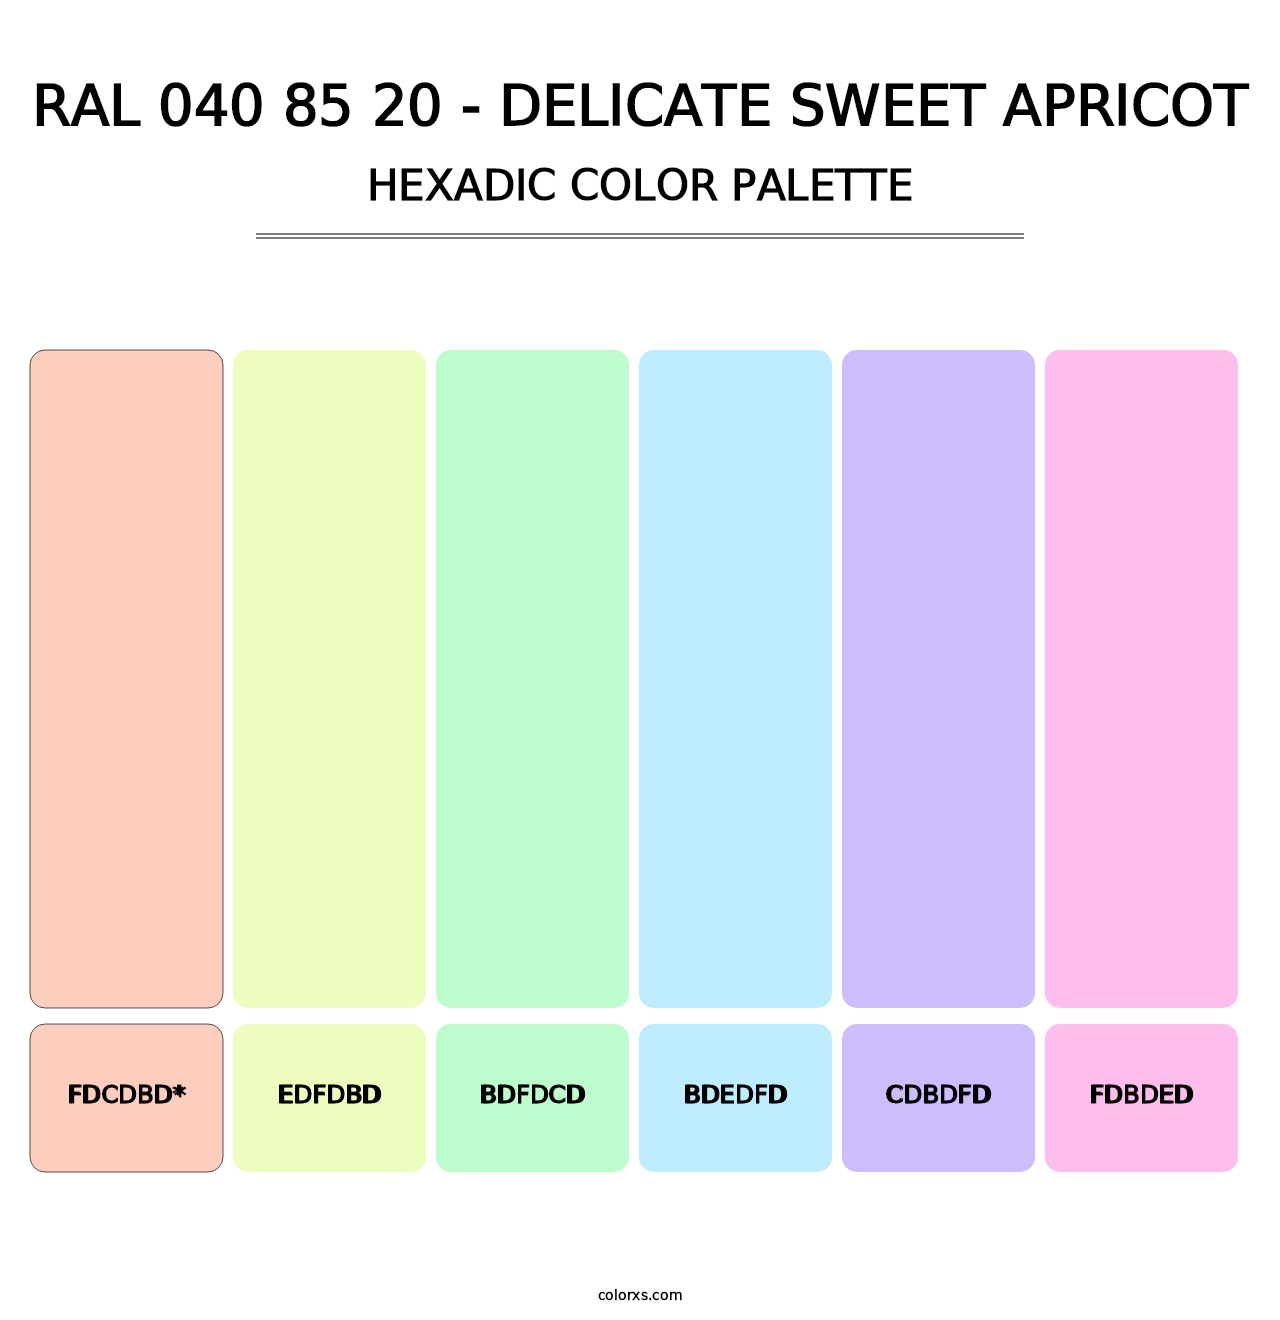 RAL 040 85 20 - Delicate Sweet Apricot - Hexadic Color Palette